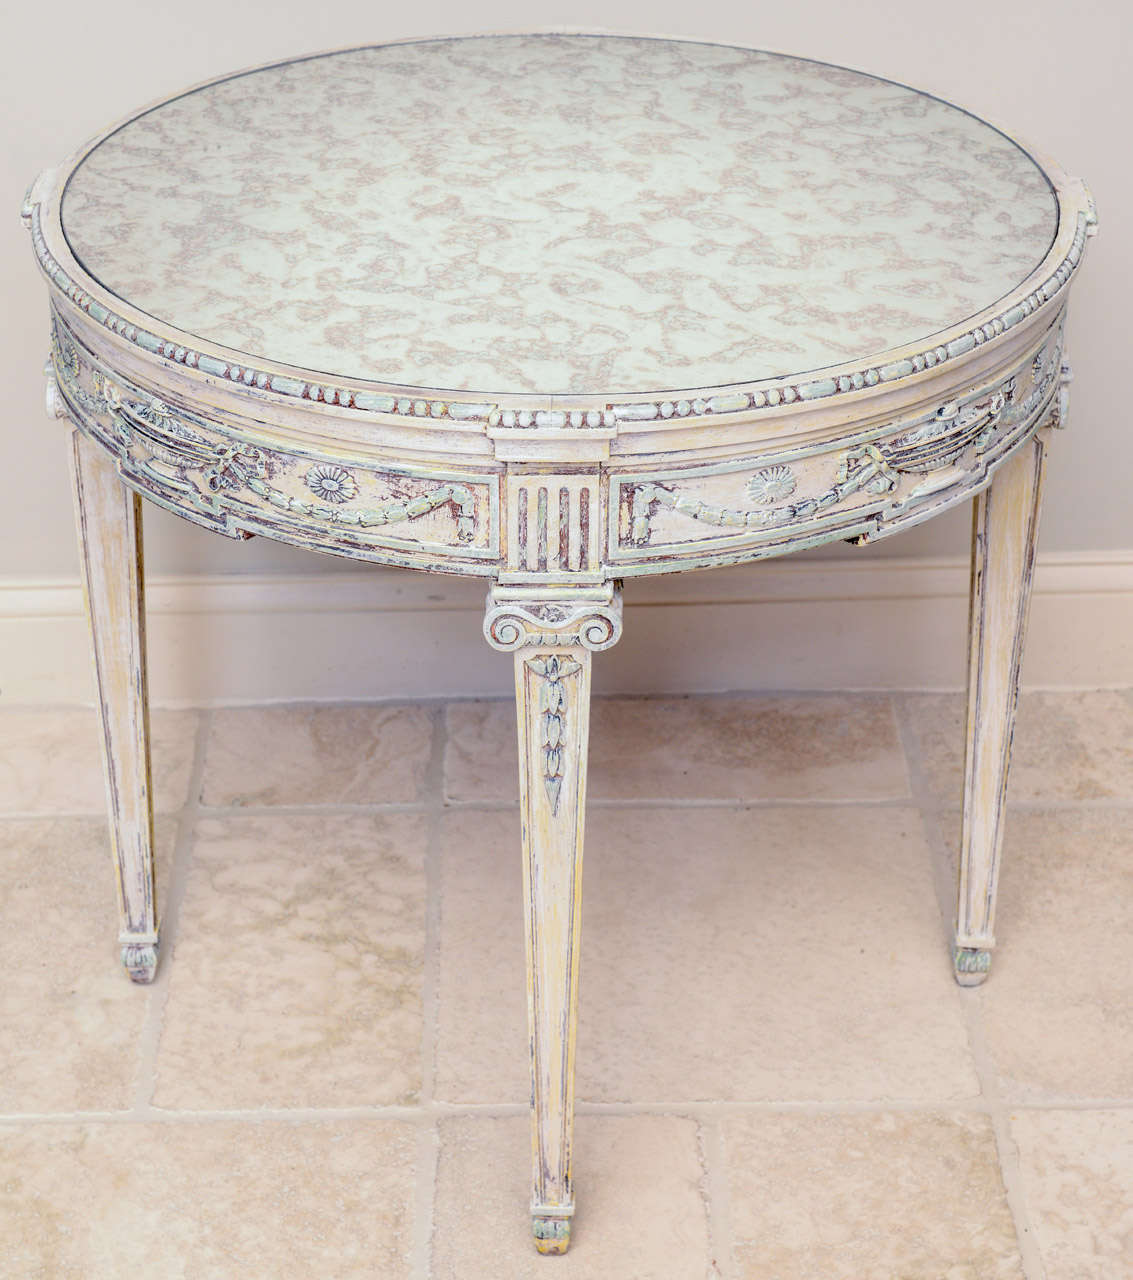 Round accent table, having a distressed painted finish, spotted mirrored top inset in apron carved with beading, urn, swag and rosette motifs, raised on square tapering legs with laurel leaf details.

Stock ID: D6608